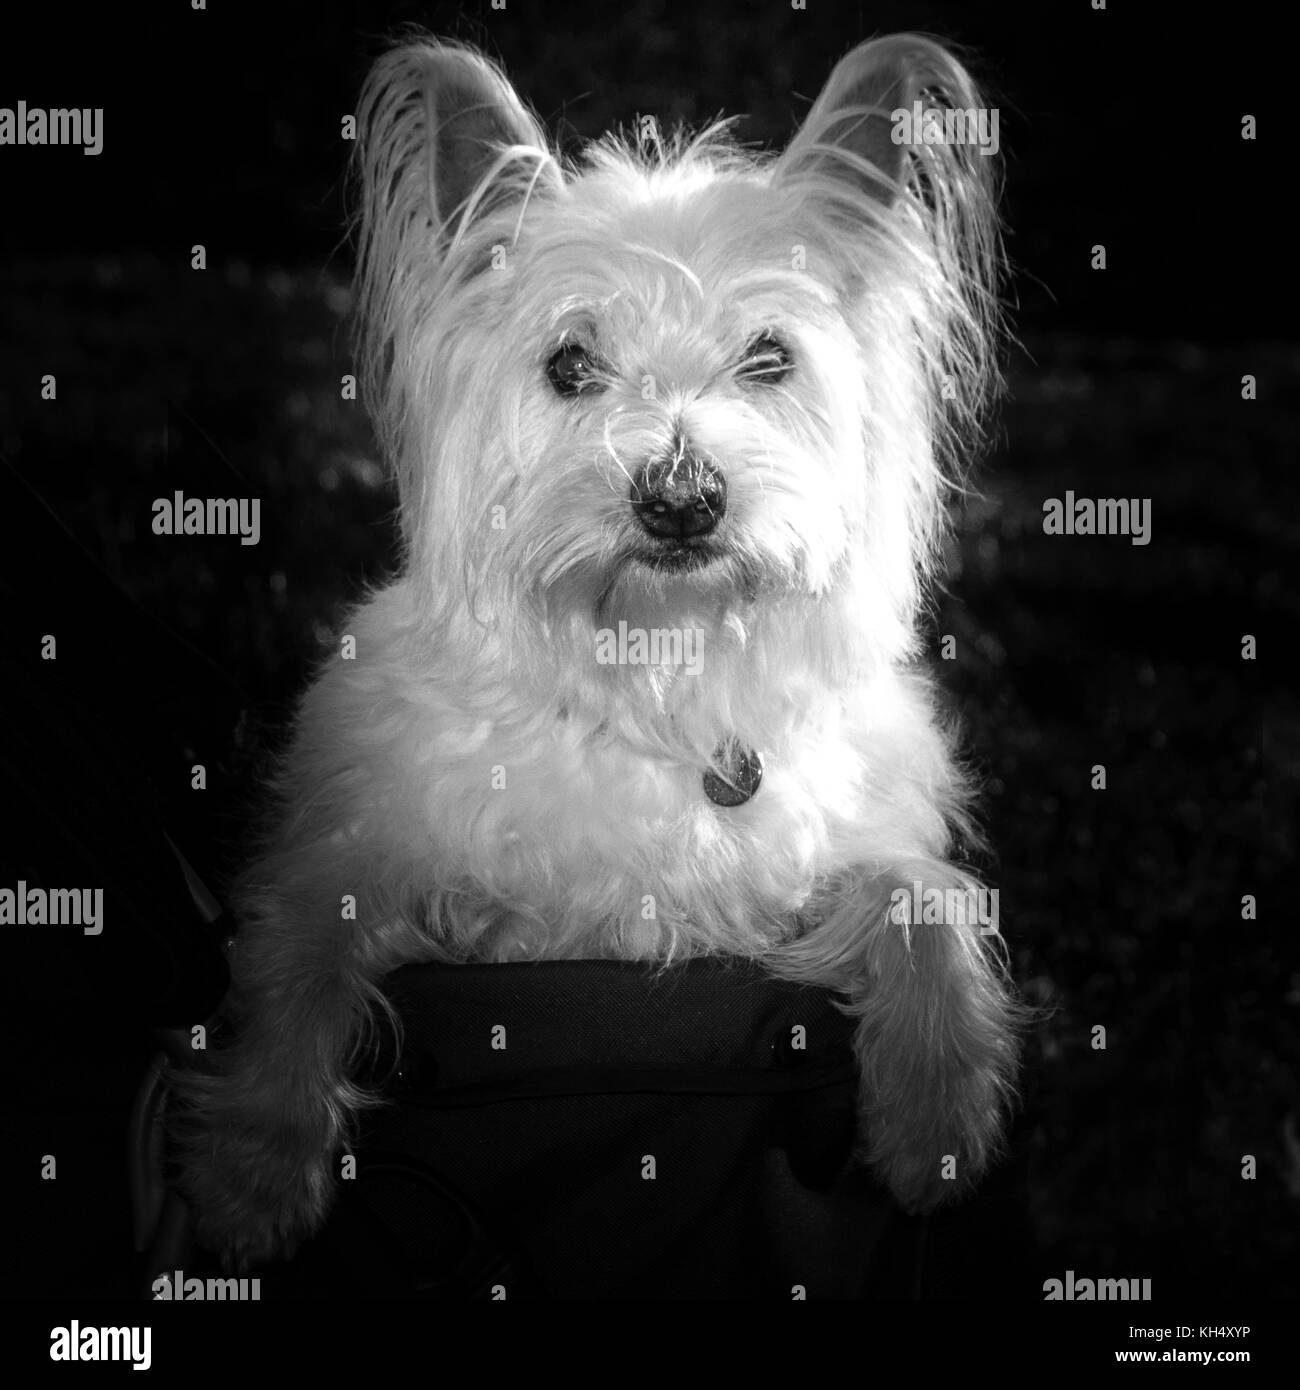 Black and white portrait of a cute  west highland  white terrier (westie) dog Stock Photo